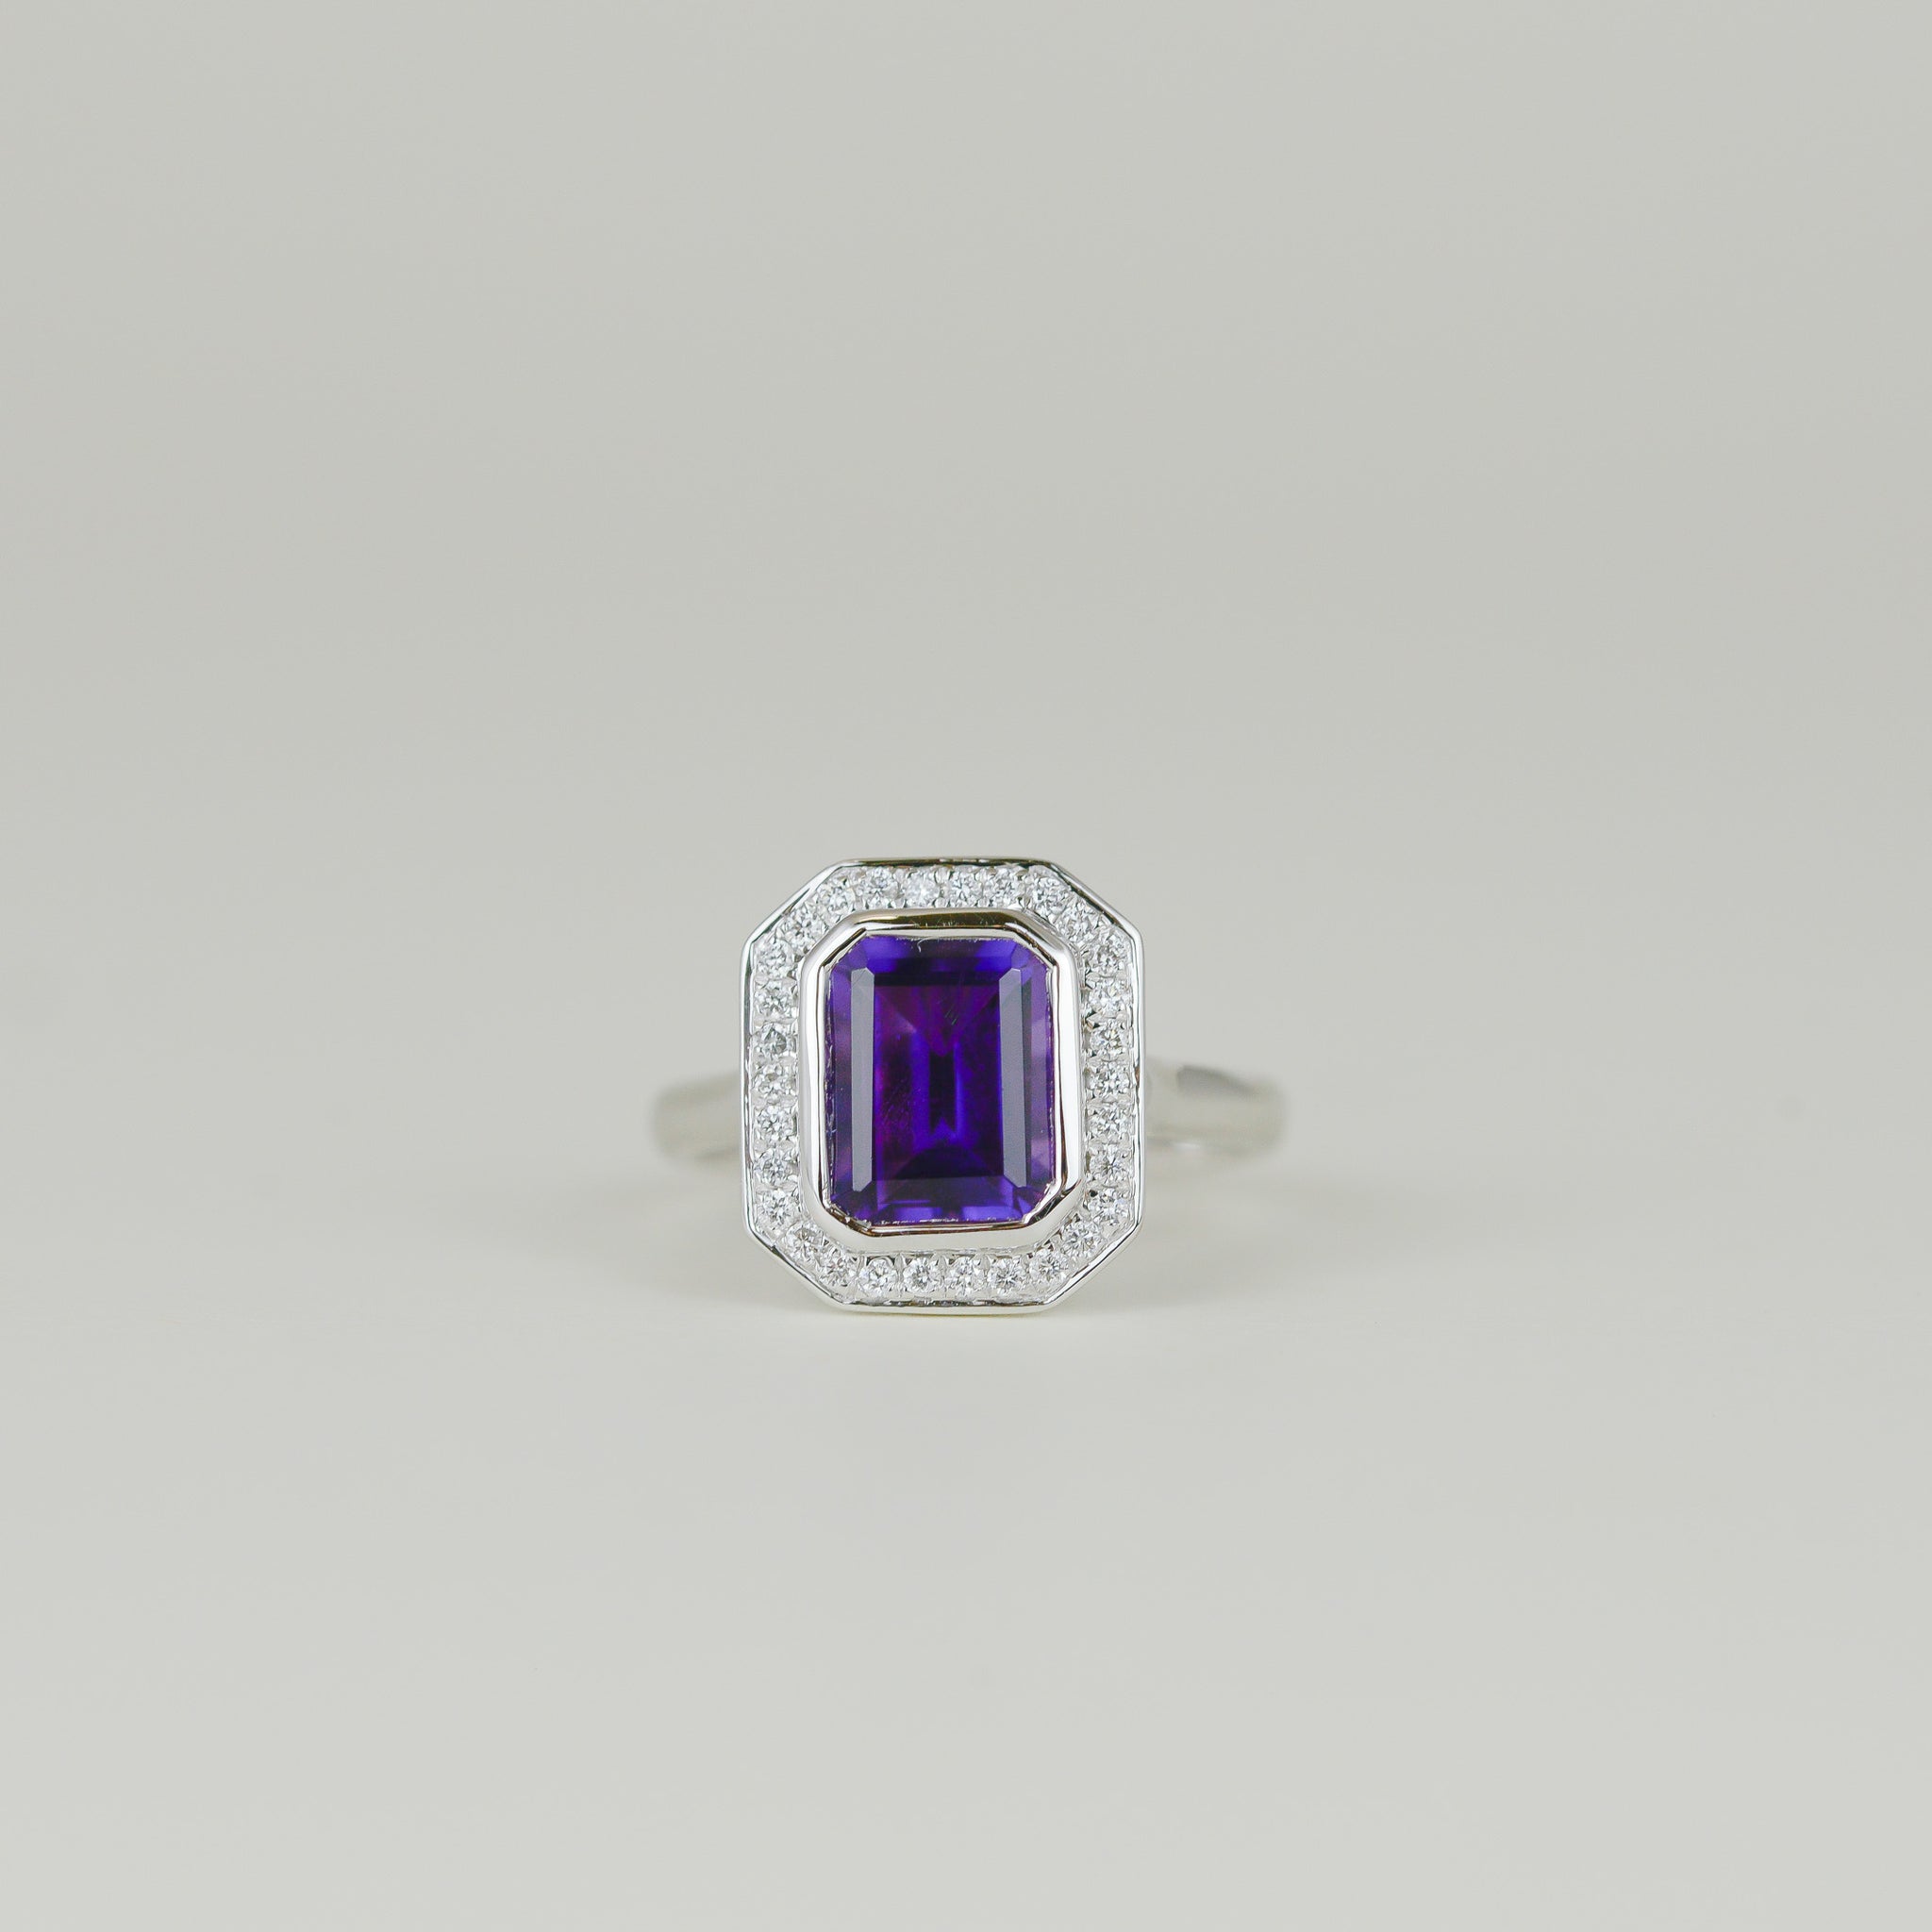 9ct White Gold 2.32ct Emerald Cut Amethyst and Diamond Art Deco Cluster Ring